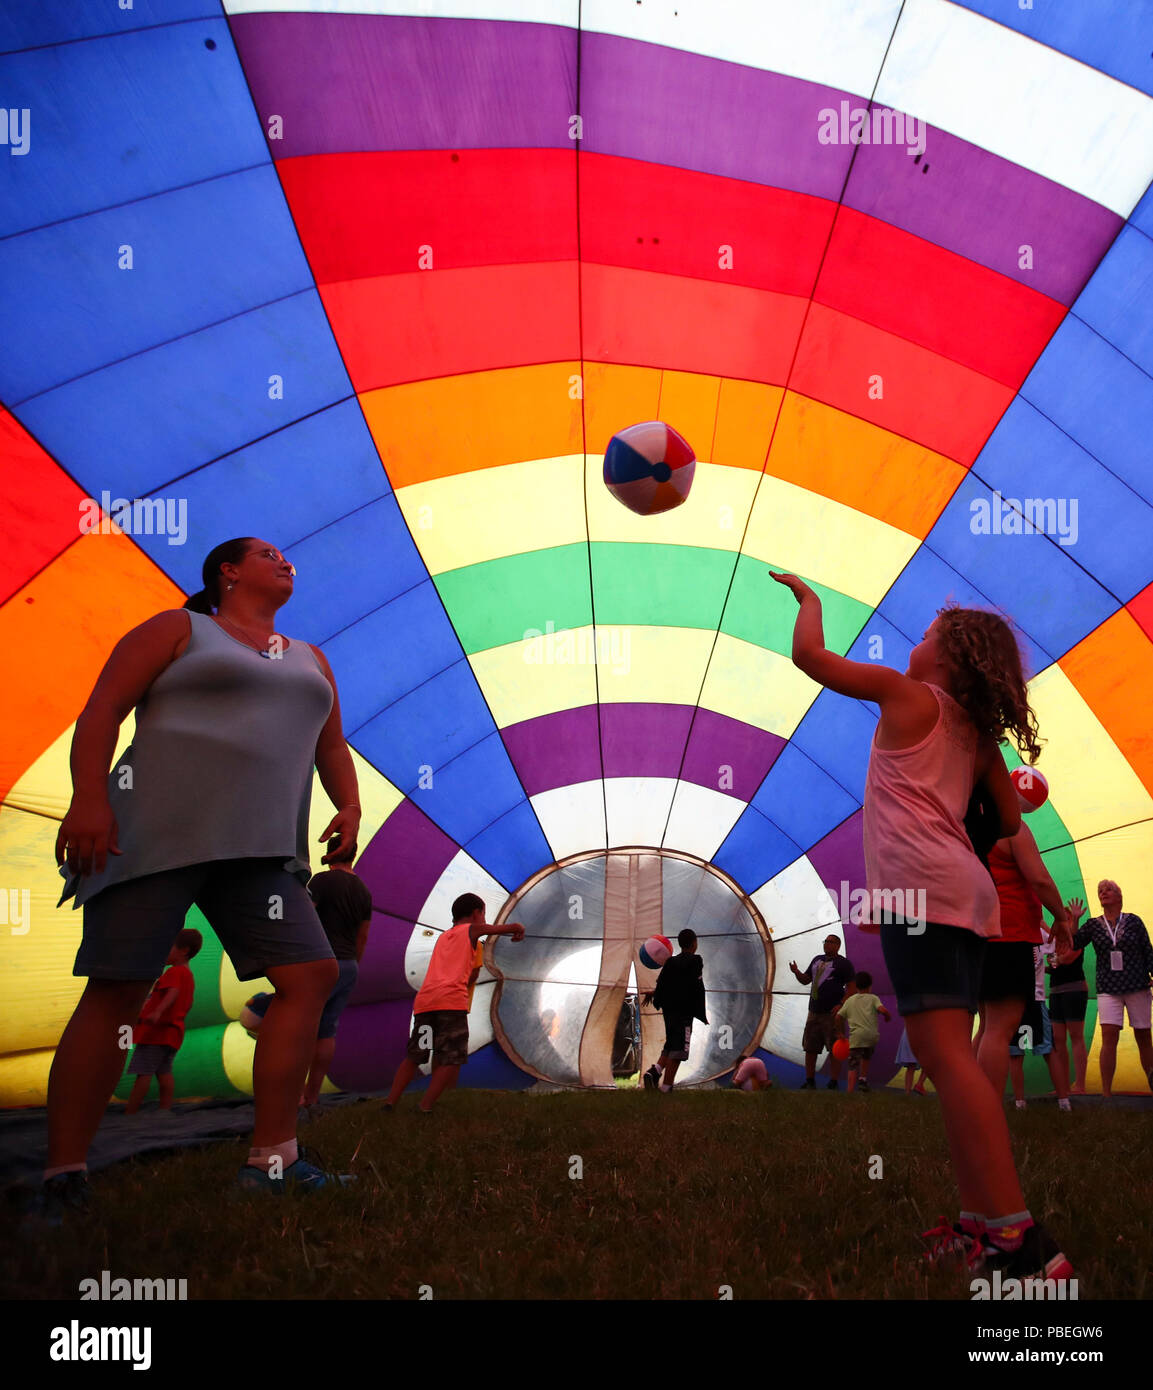 New Jersey, USA. 27th July, 2018. People take a tour inside an inflated balloon during the 36th Quickcheck New Jersey Festival of Ballooning in Readington of New Jersey, the United States, July 27, 2018. The three-day festival which kicked off on Friday, features mass inflation and ascension of up to 100 hot air balloons during the weekend, expected to attract 165,000 people. Credit: Wang Ying/Xinhua/Alamy Live News Stock Photo